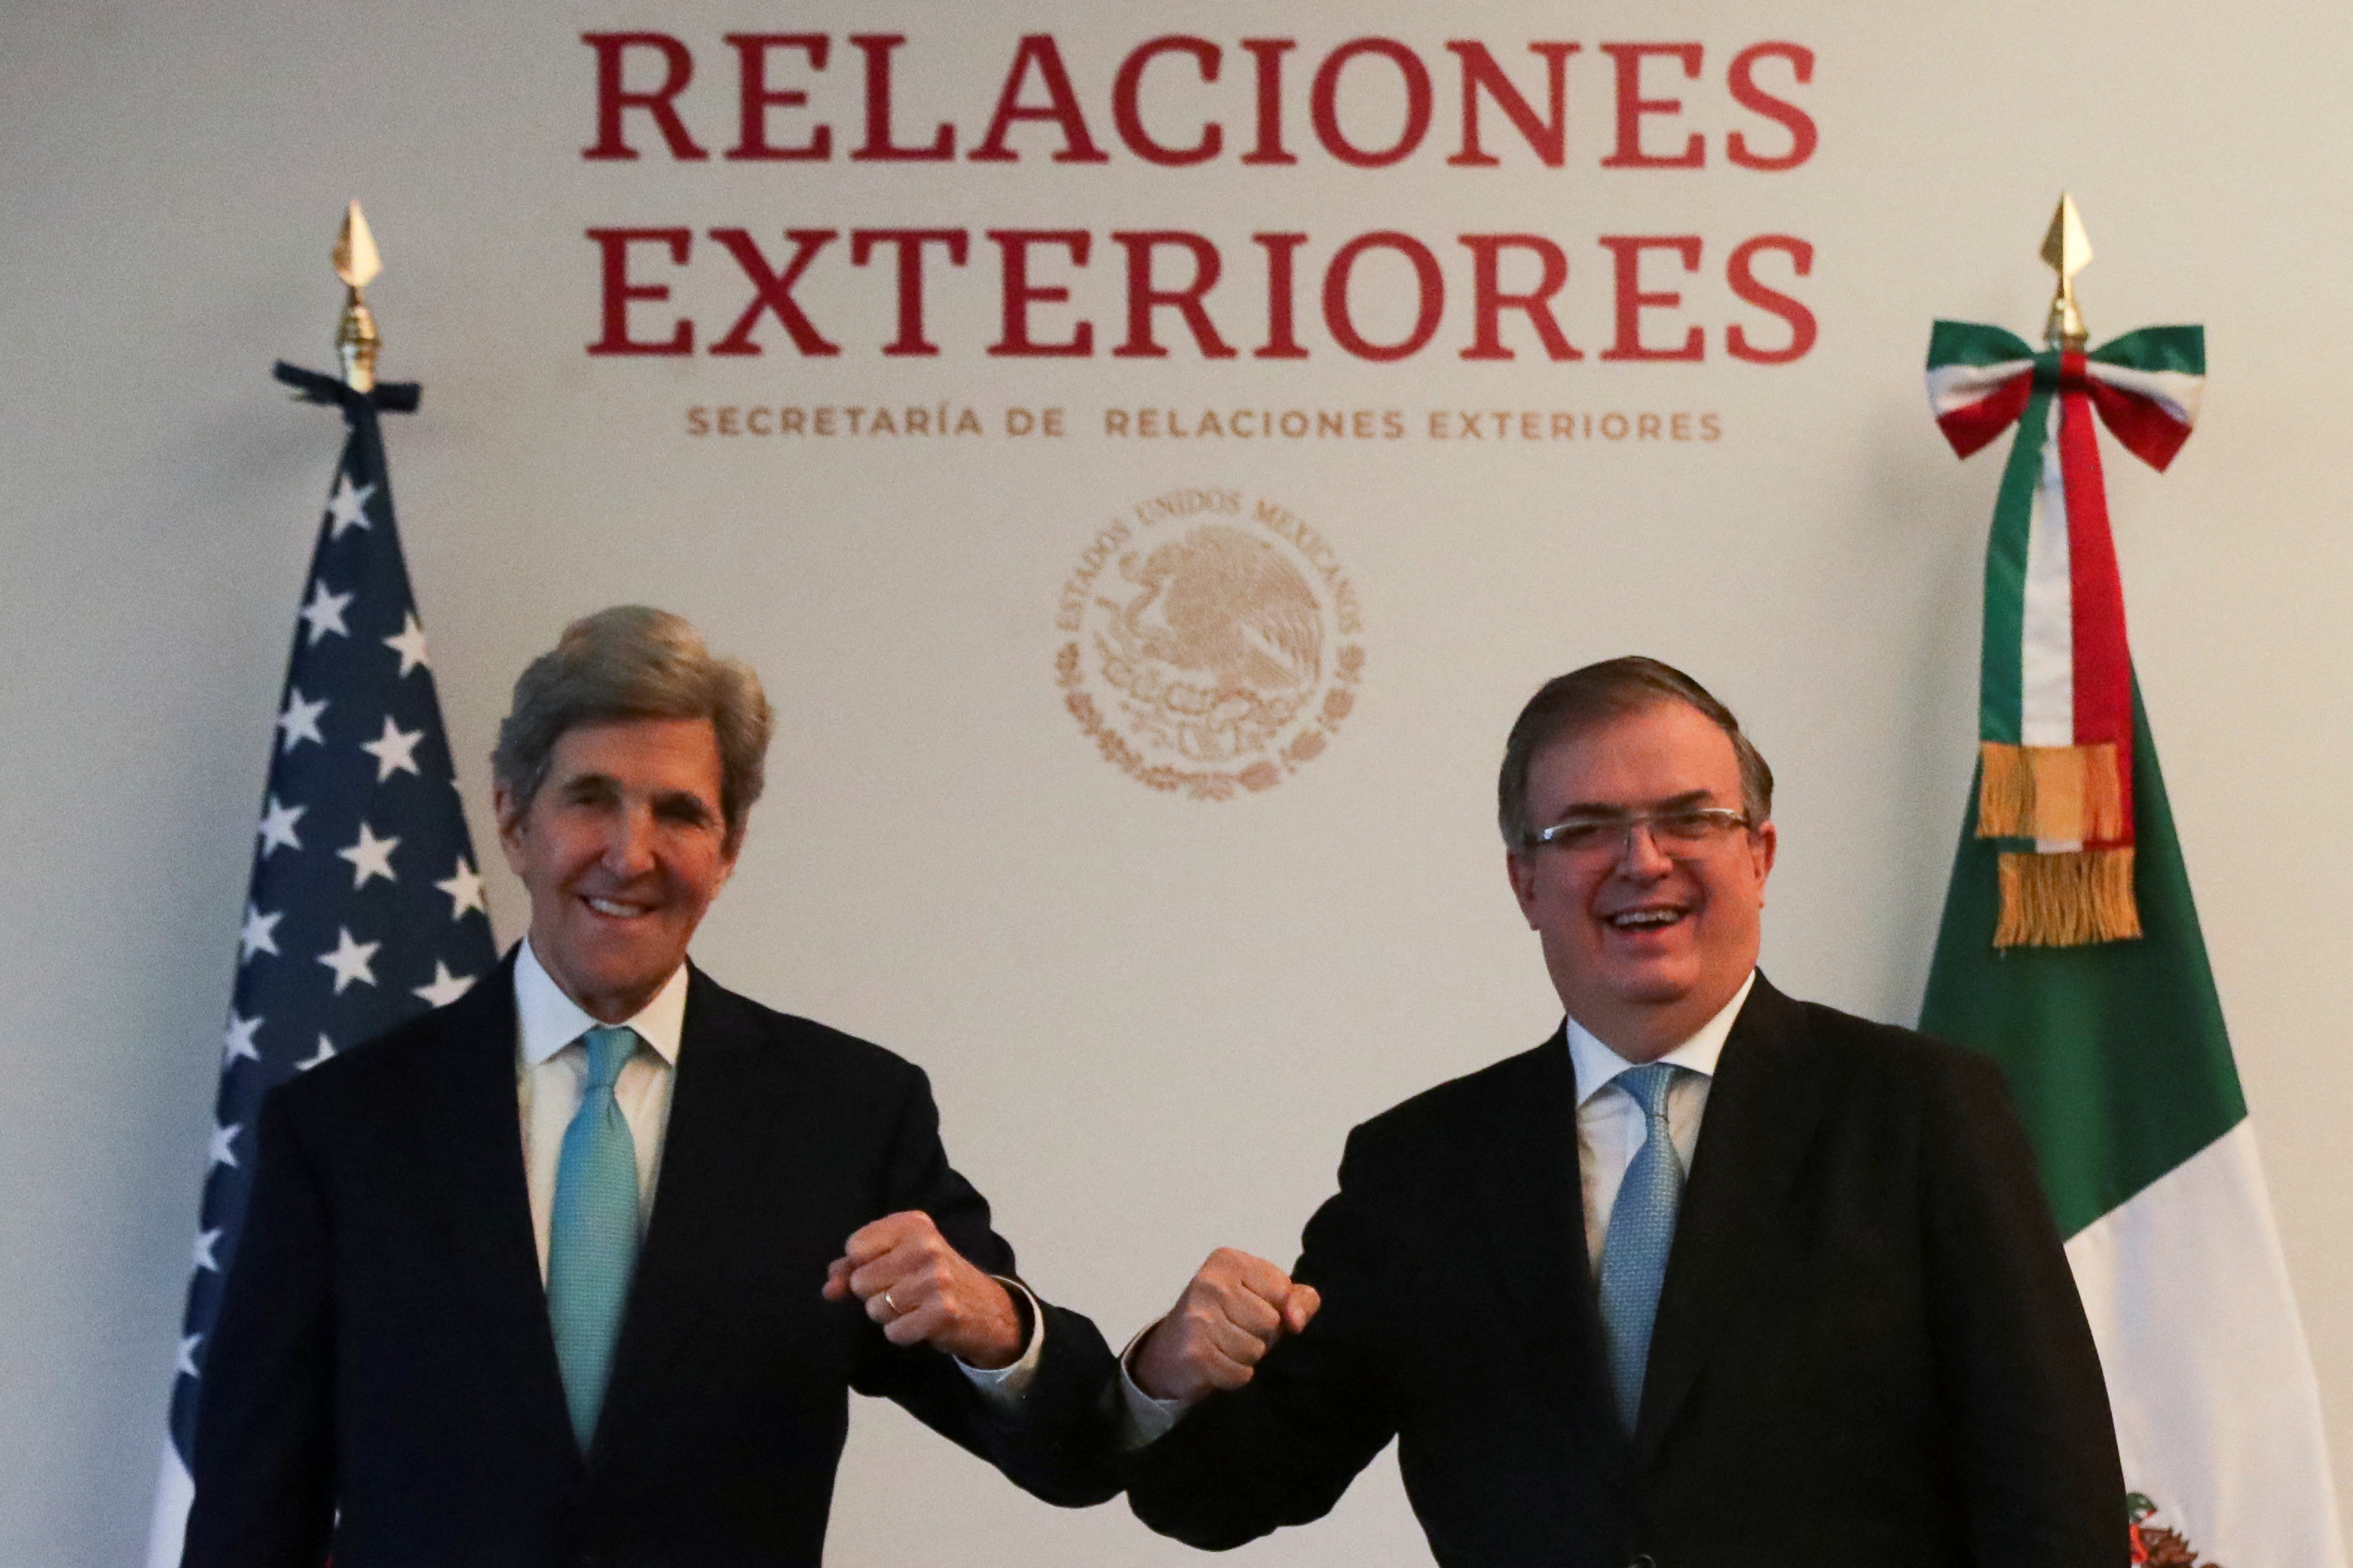 U.S. Special Presidential Envoy for Climate John Kerry visits Mexico City